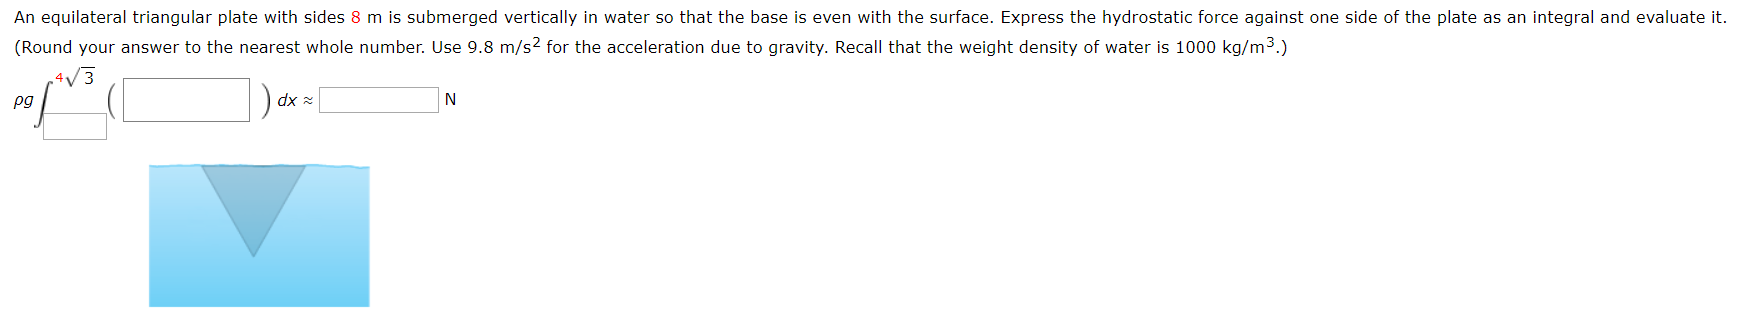 An equilateral triangular plate with sides 8 m is submerged vertically in water so that the base is even with the surface. Express the hydrostatic force against one side of the plate as an integral and evaluate it.
(Round your answer to the nearest whole number. Use 9.8 m/s2 for the acceleration due to gravity. Recall that the weight density of water is 1000 kg/m3.)
dx
N
pg
